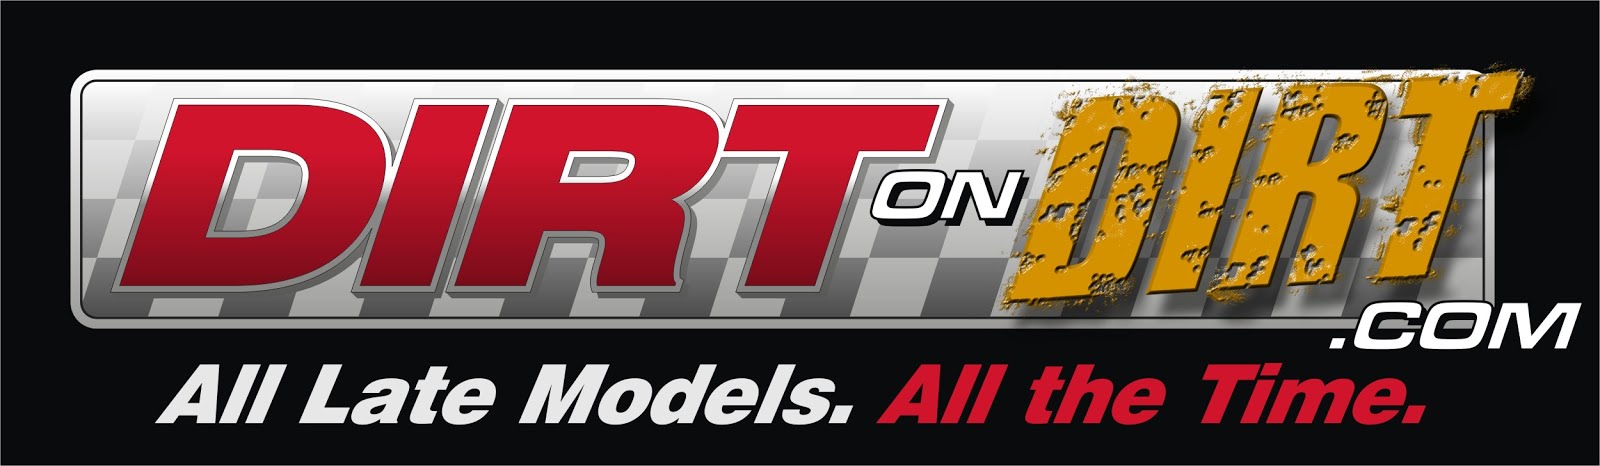 Are You A Dirt Late Model Fan?